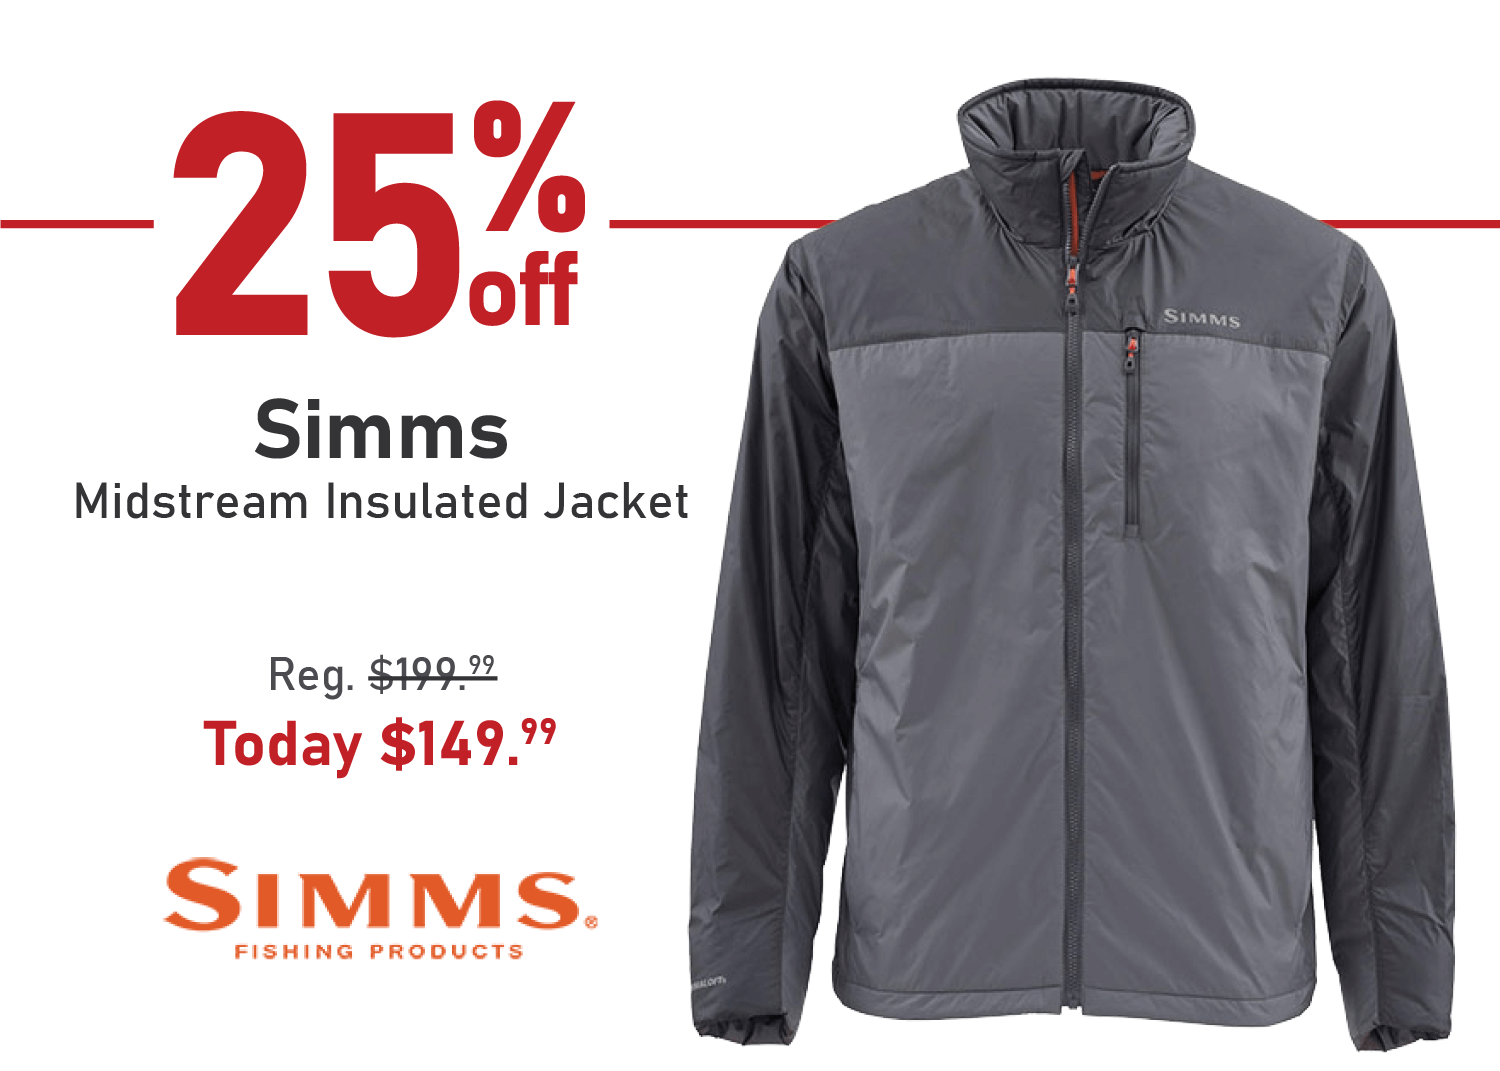 Save 25% on the Simms Midstream Insulated Jacket